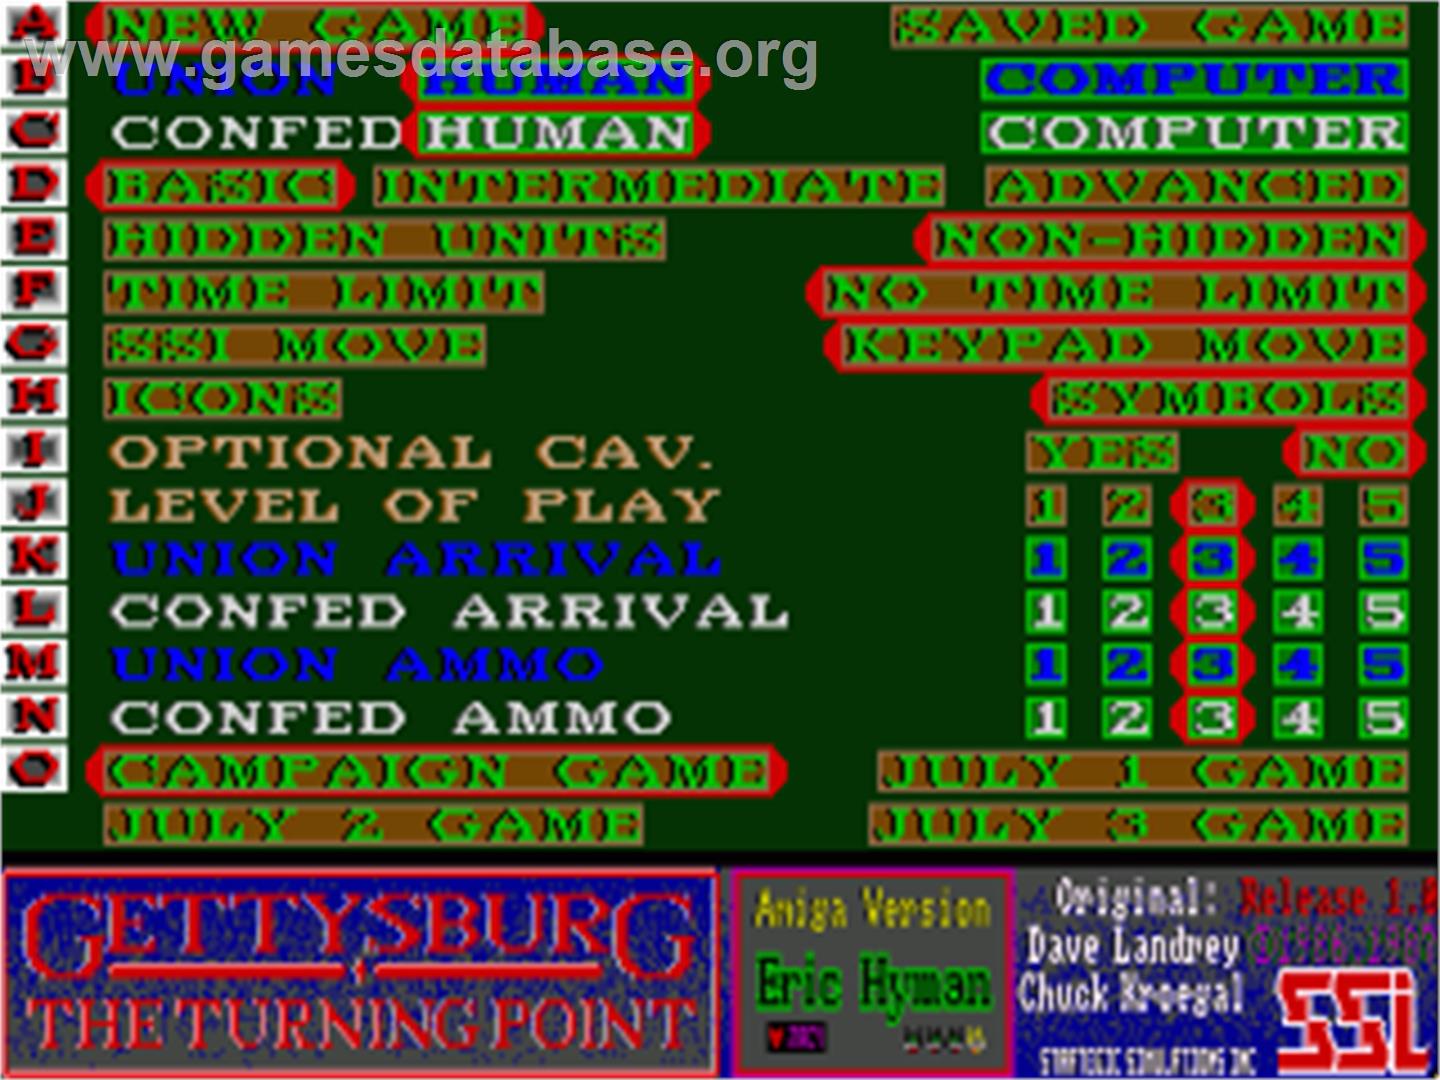 Gettysburg: The Turning Point - Commodore Amiga - Artwork - Title Screen